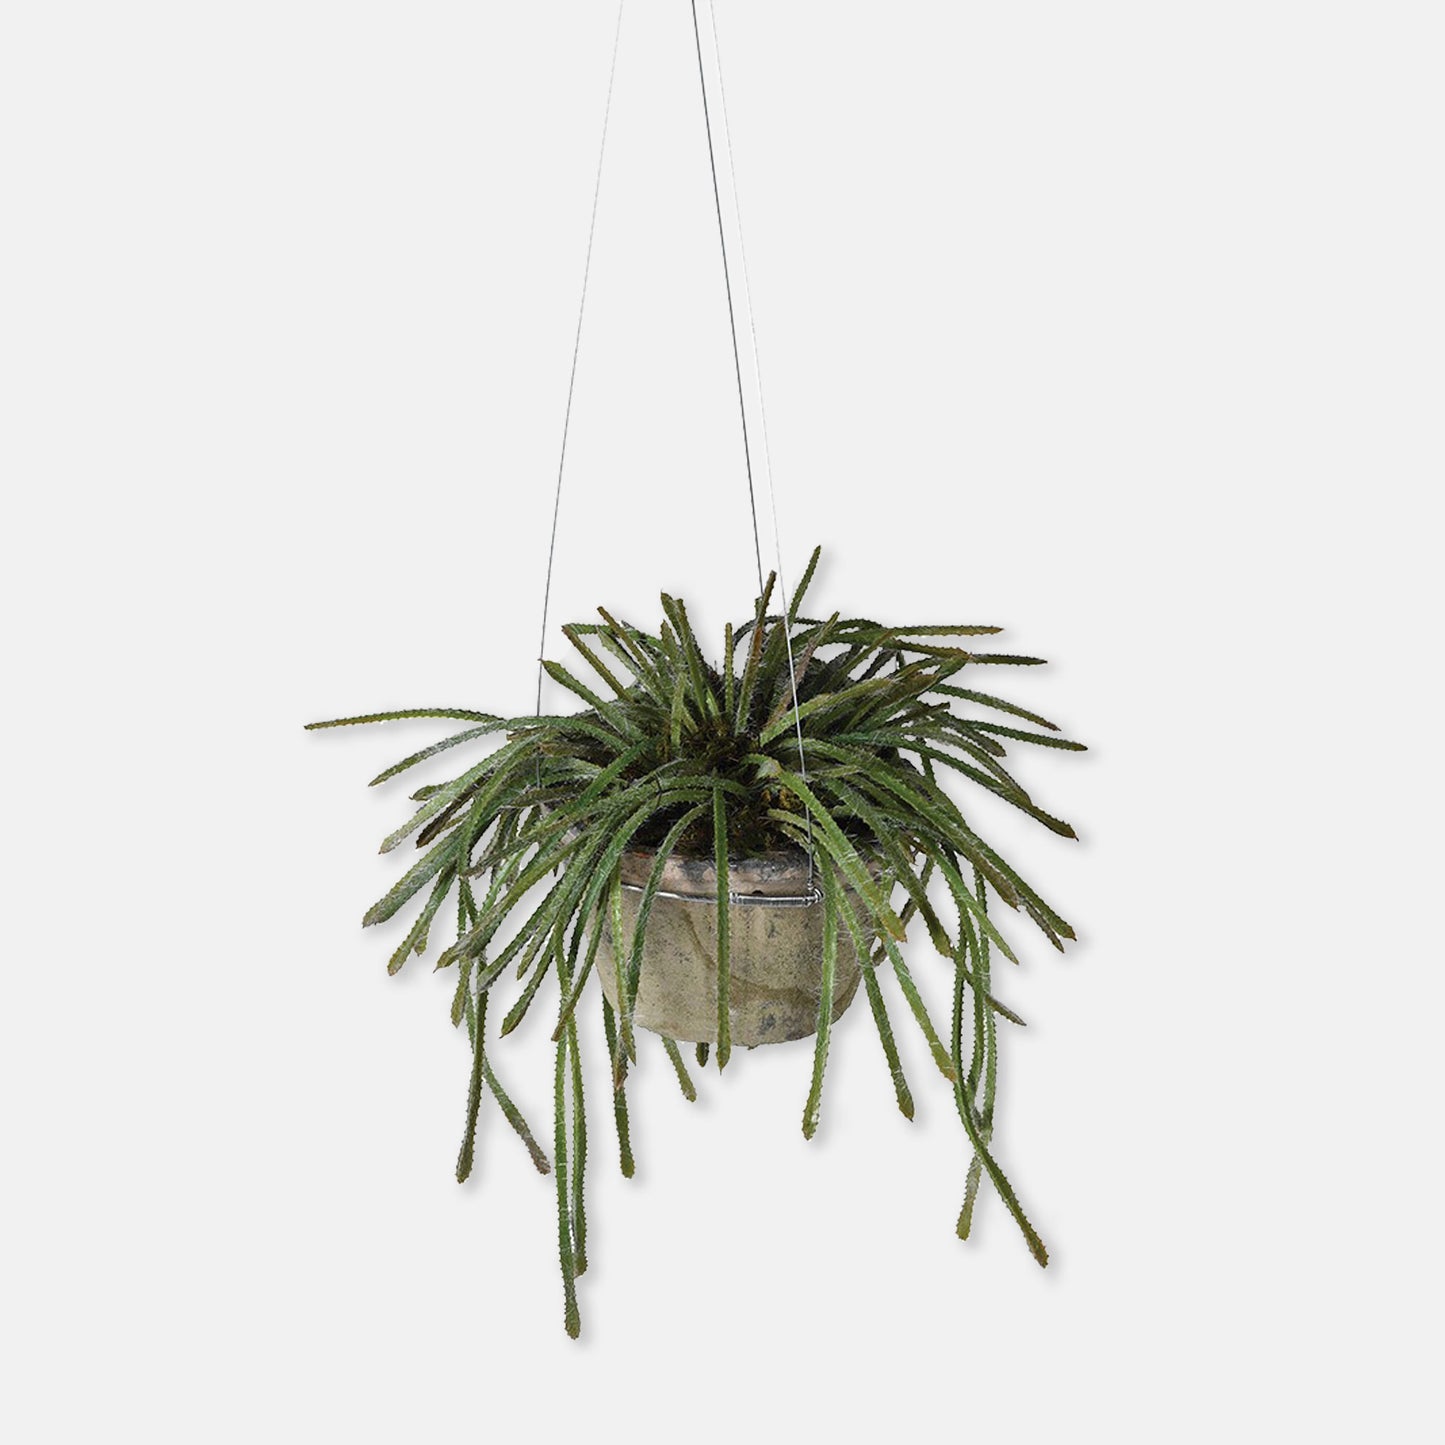 Artificial trailing cactus plant set in grey stone pot, with wires for hanging.